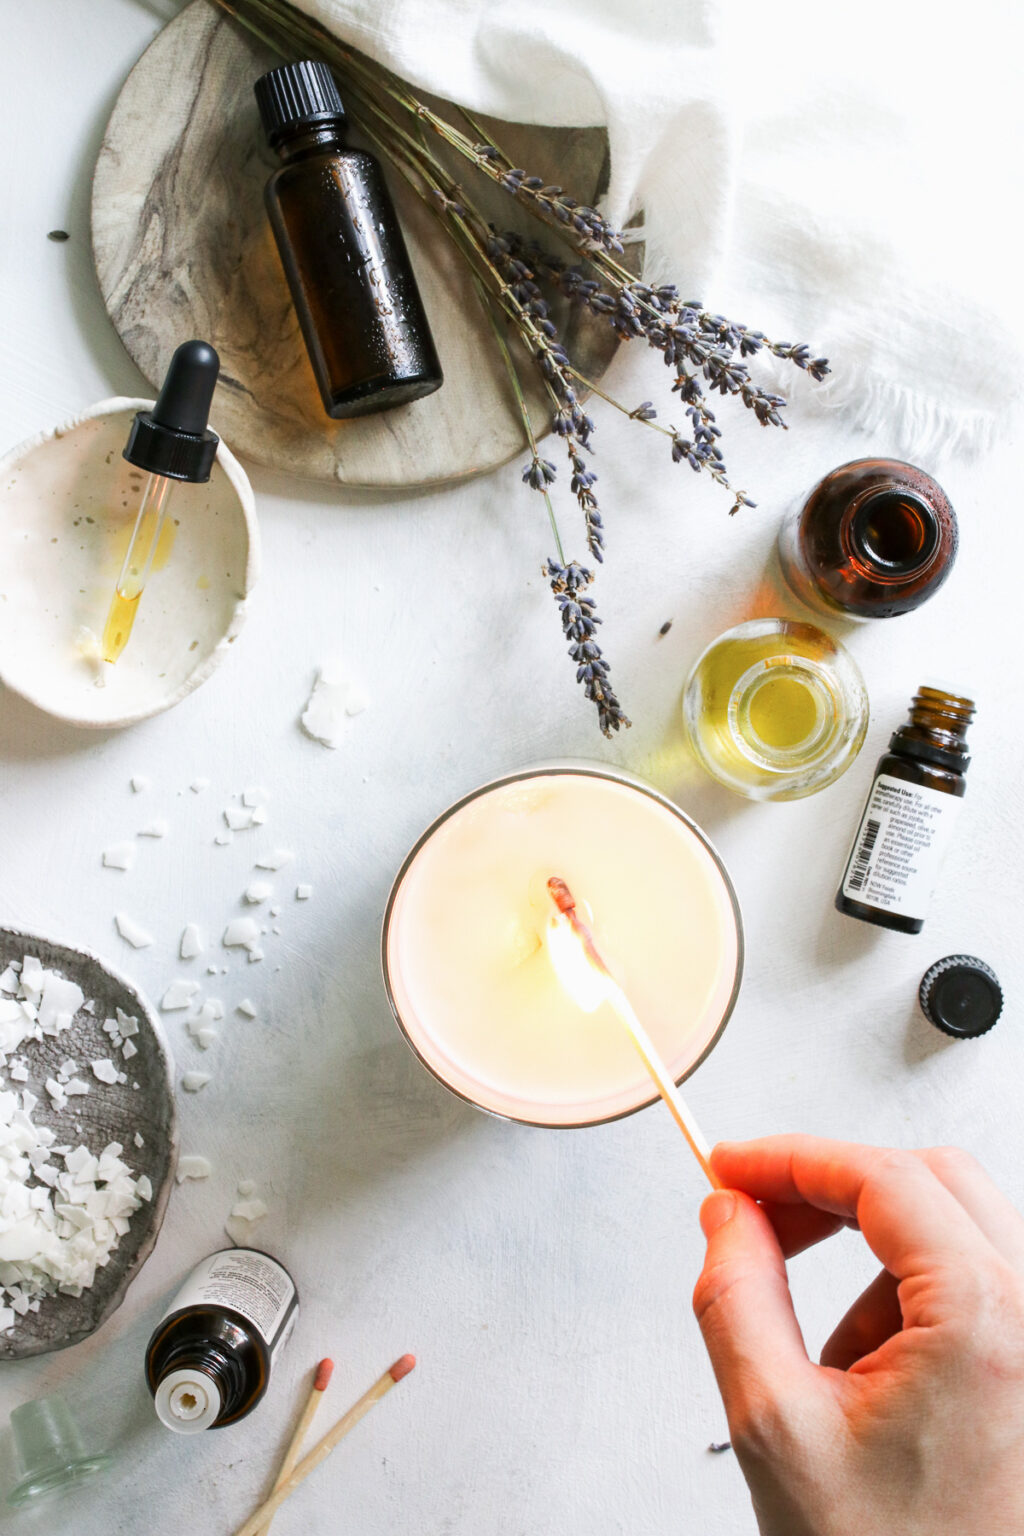 How to Make Candles at Home [w/ Essential Oils] - The Healthy Maven